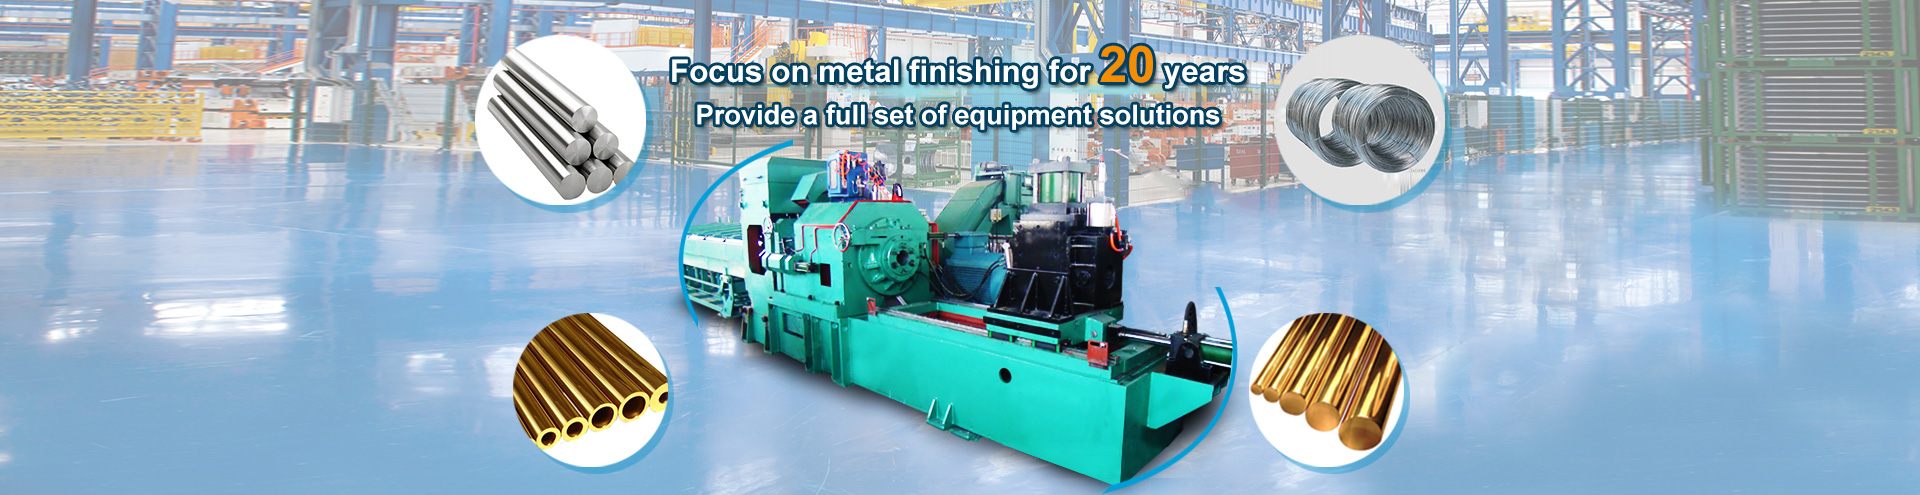 Focus on metal finishing for 20 years,Provide a full set of equipment solutions.